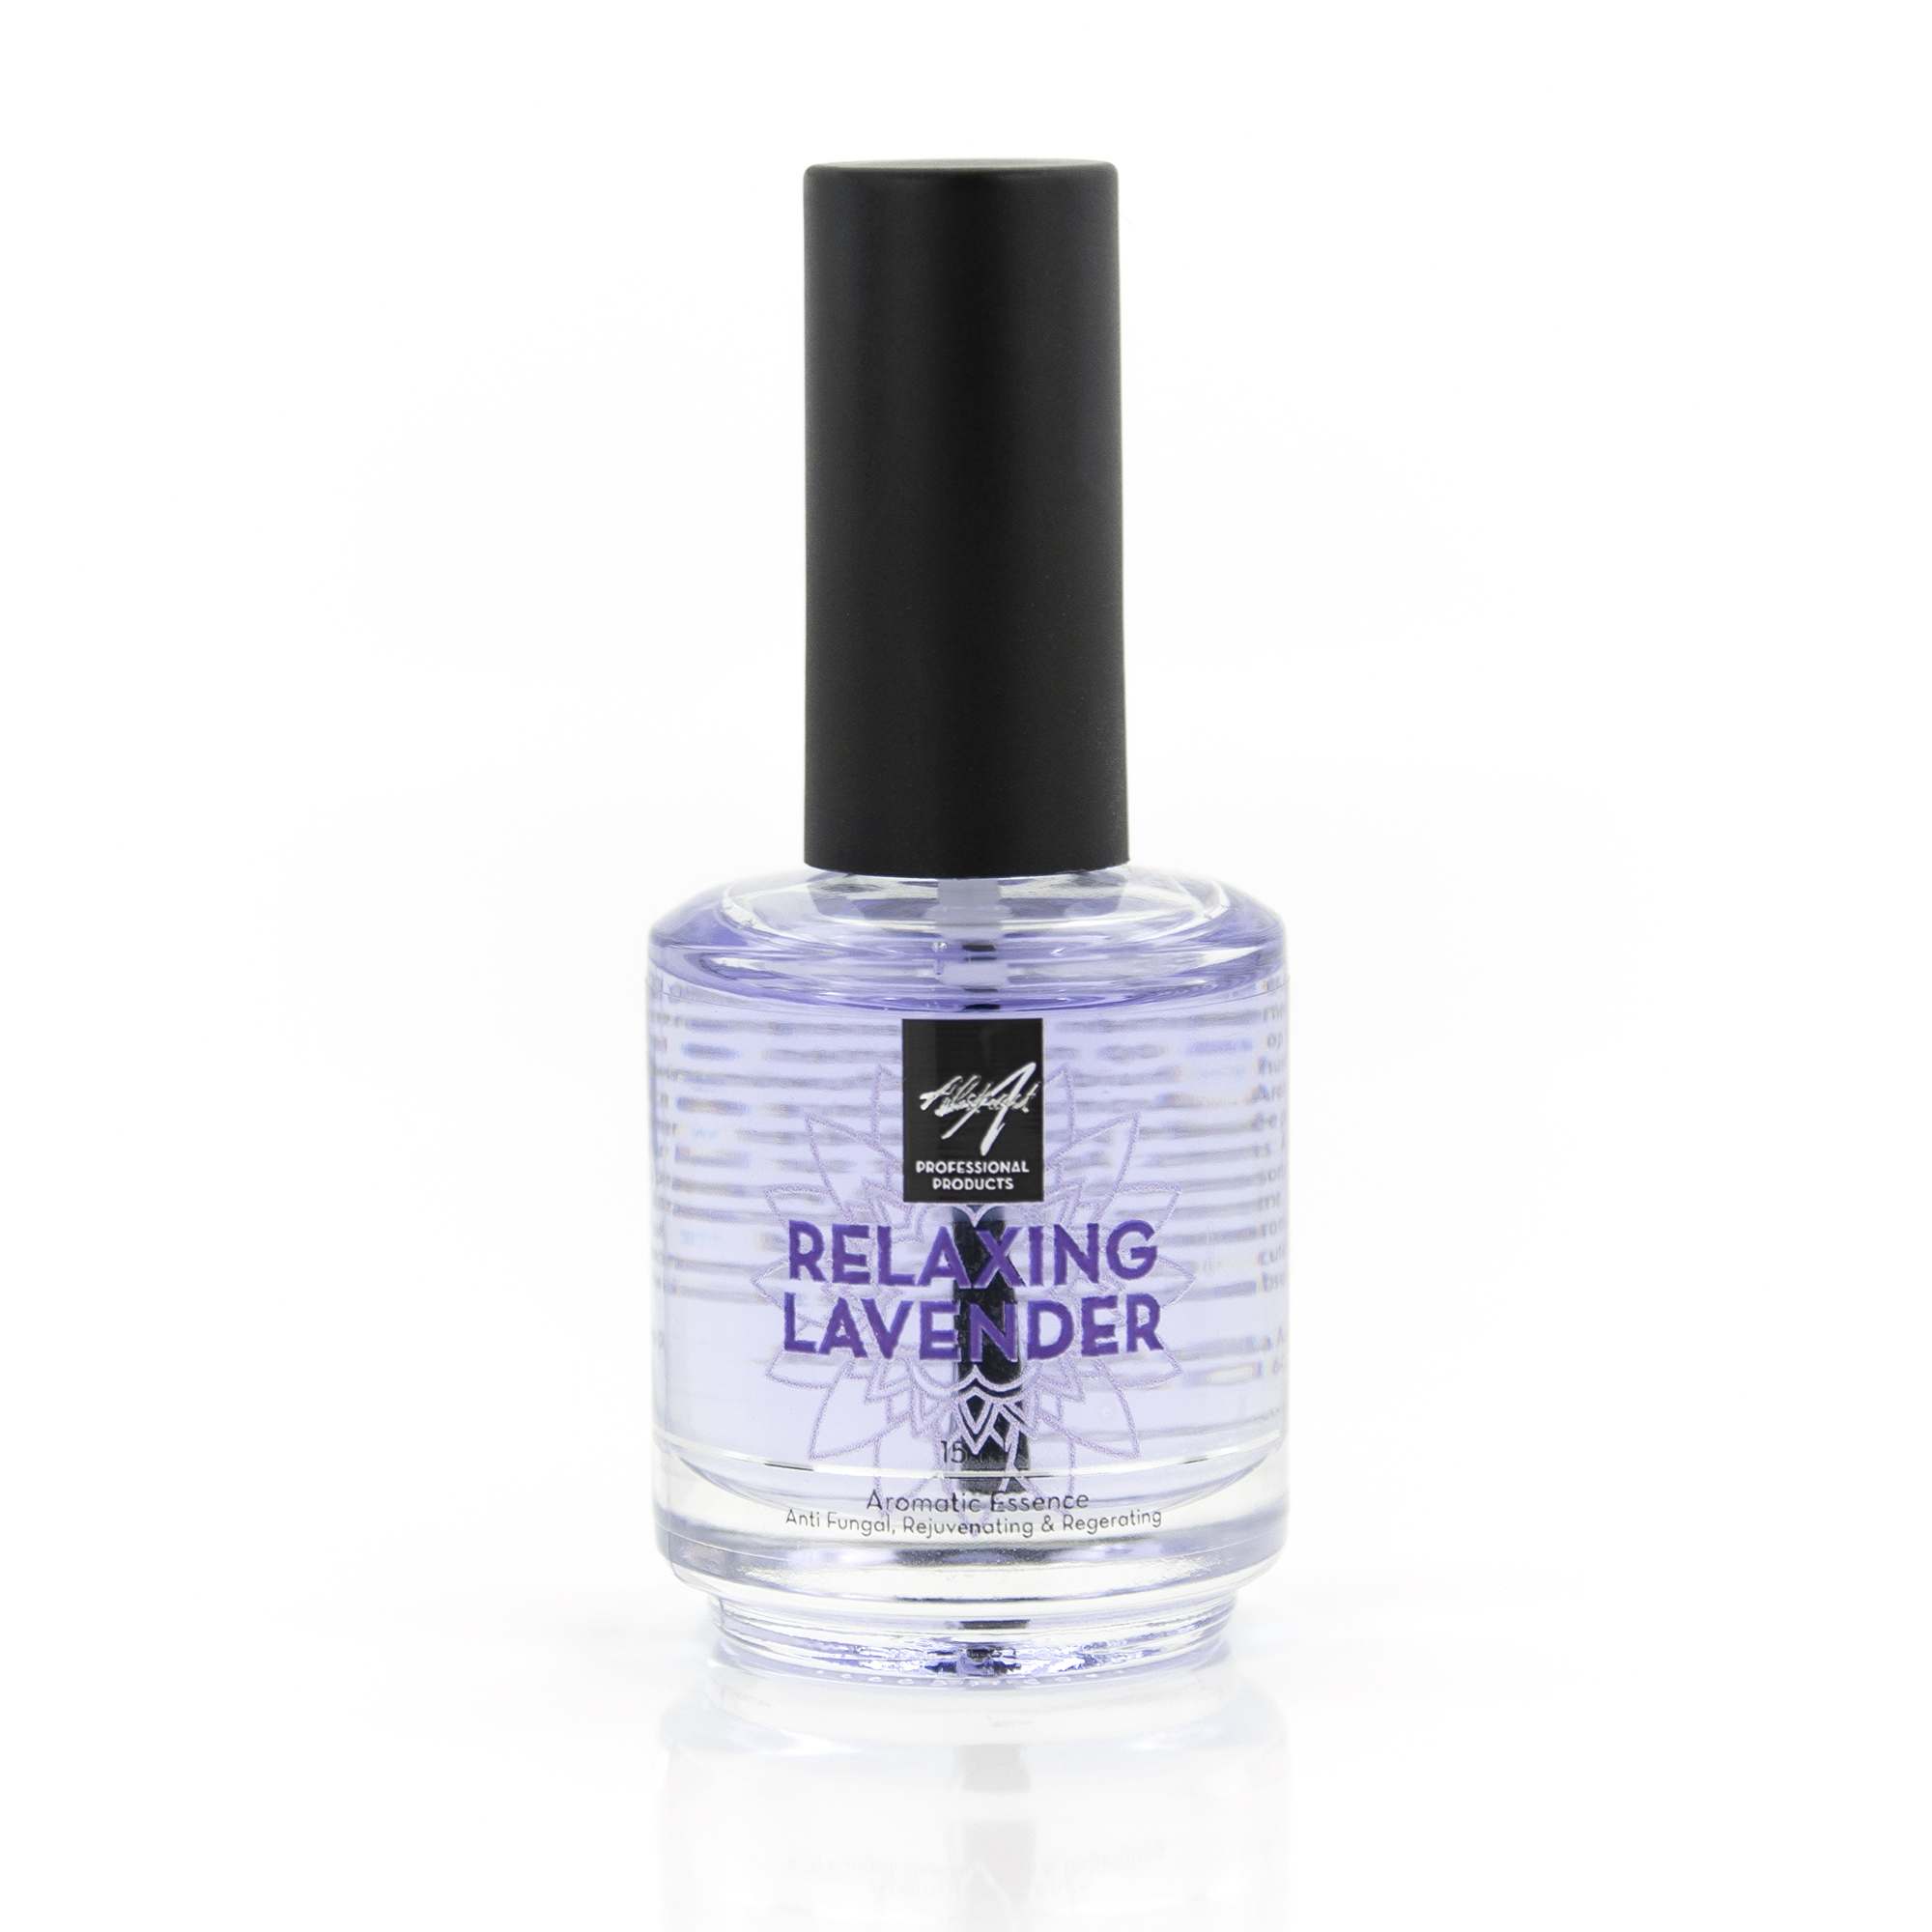 Relaxing Lavender Aromatic Essence 15ml, Abstract | 227896